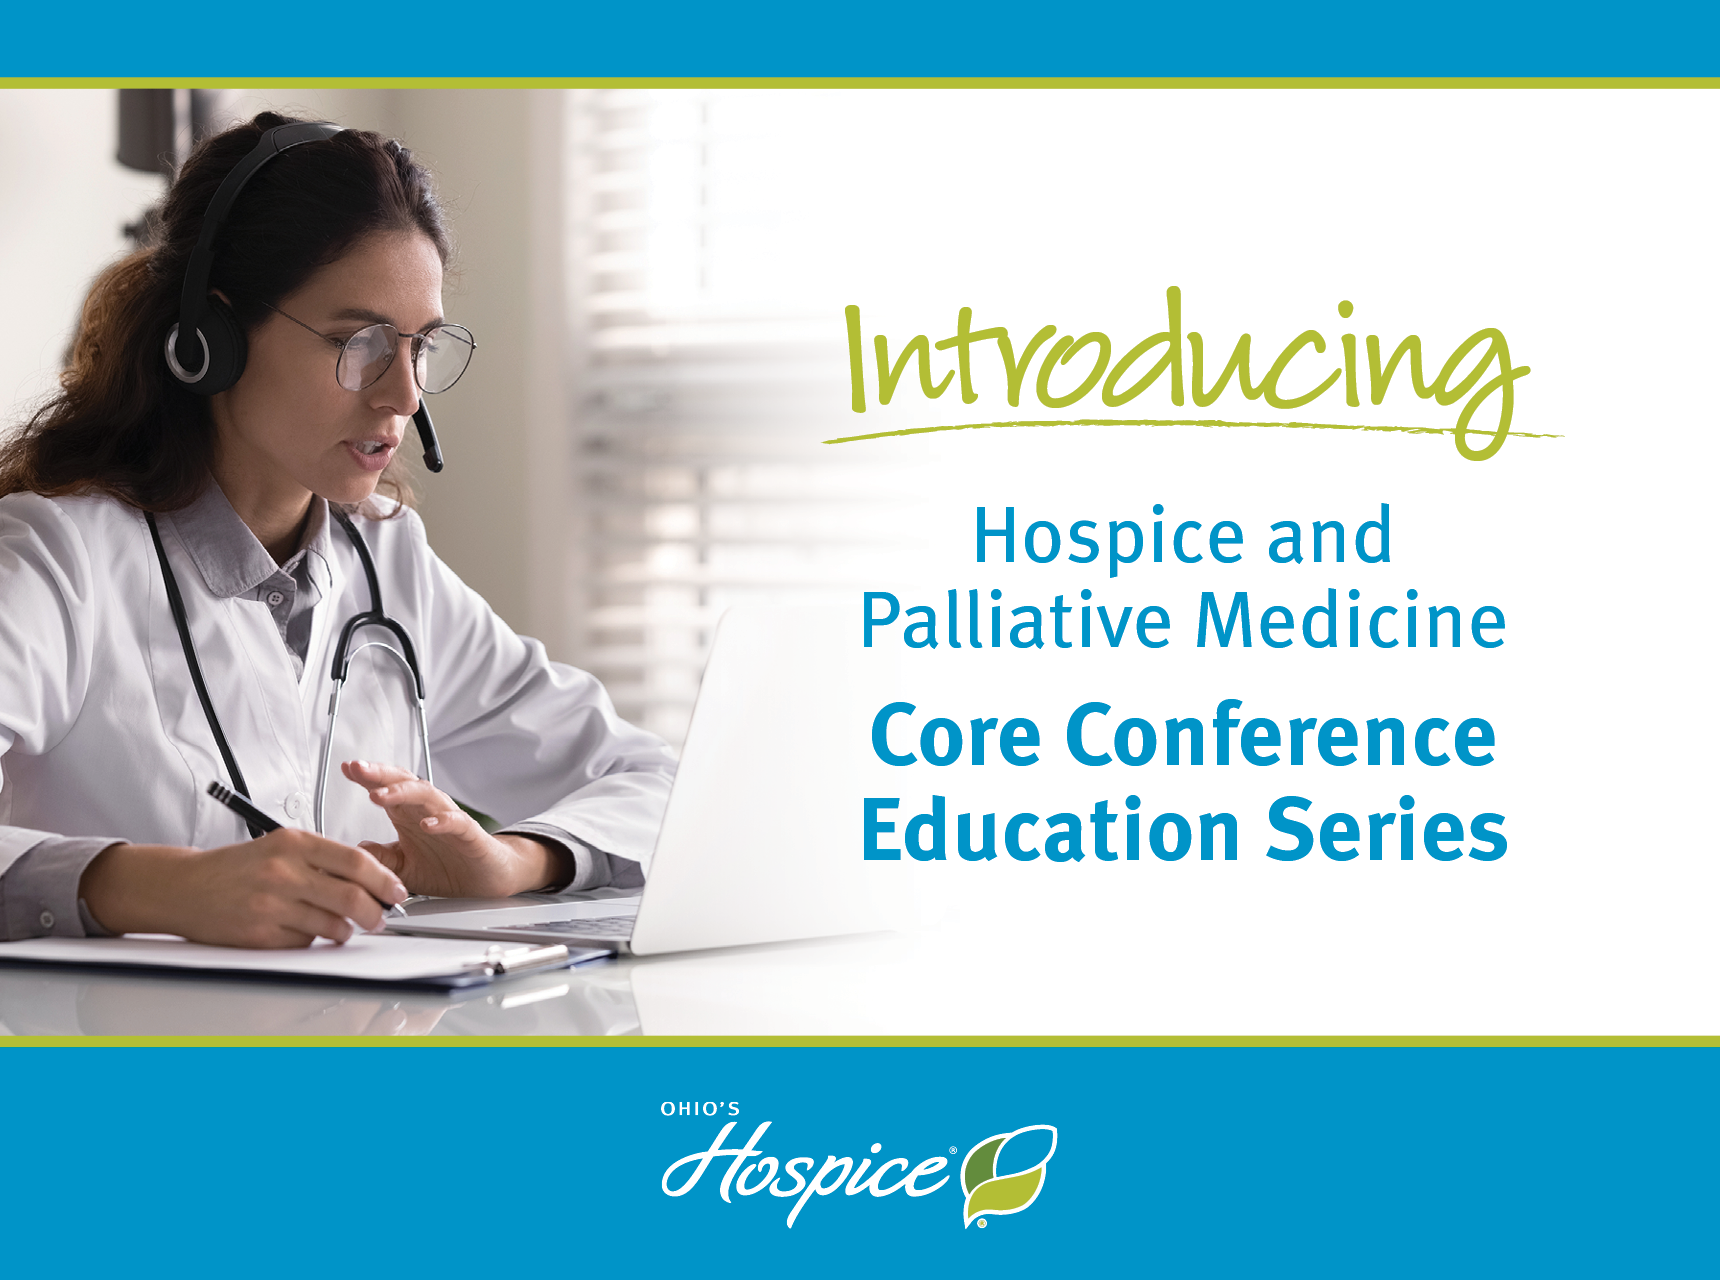 Introducing Hospice and Palliative Medicine Core Conference Education Series